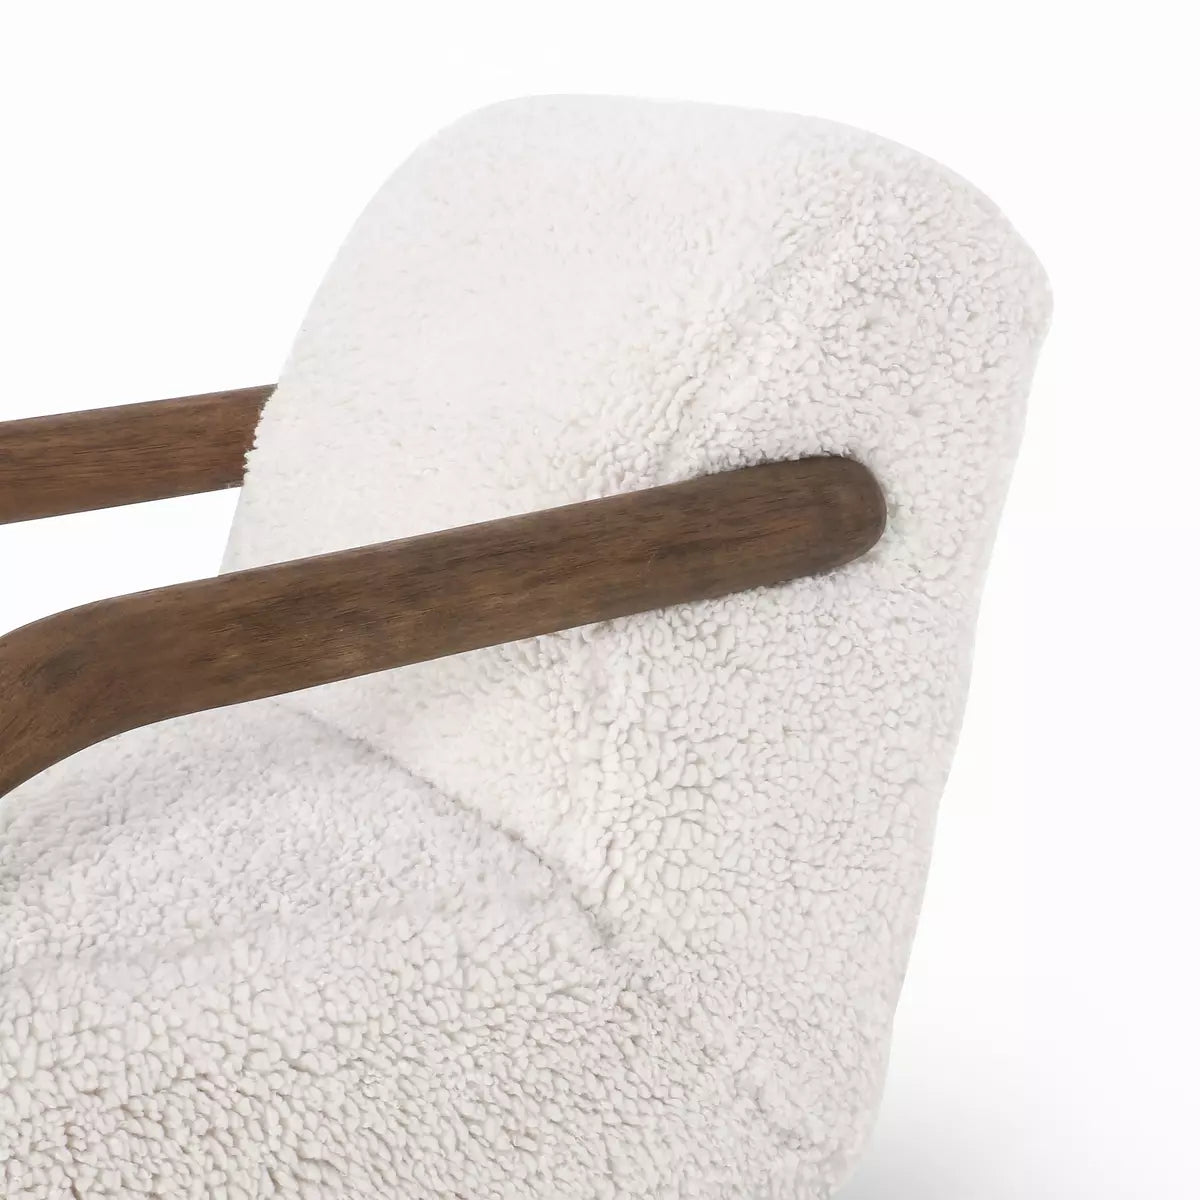 Aniston Chair - Andes Natural